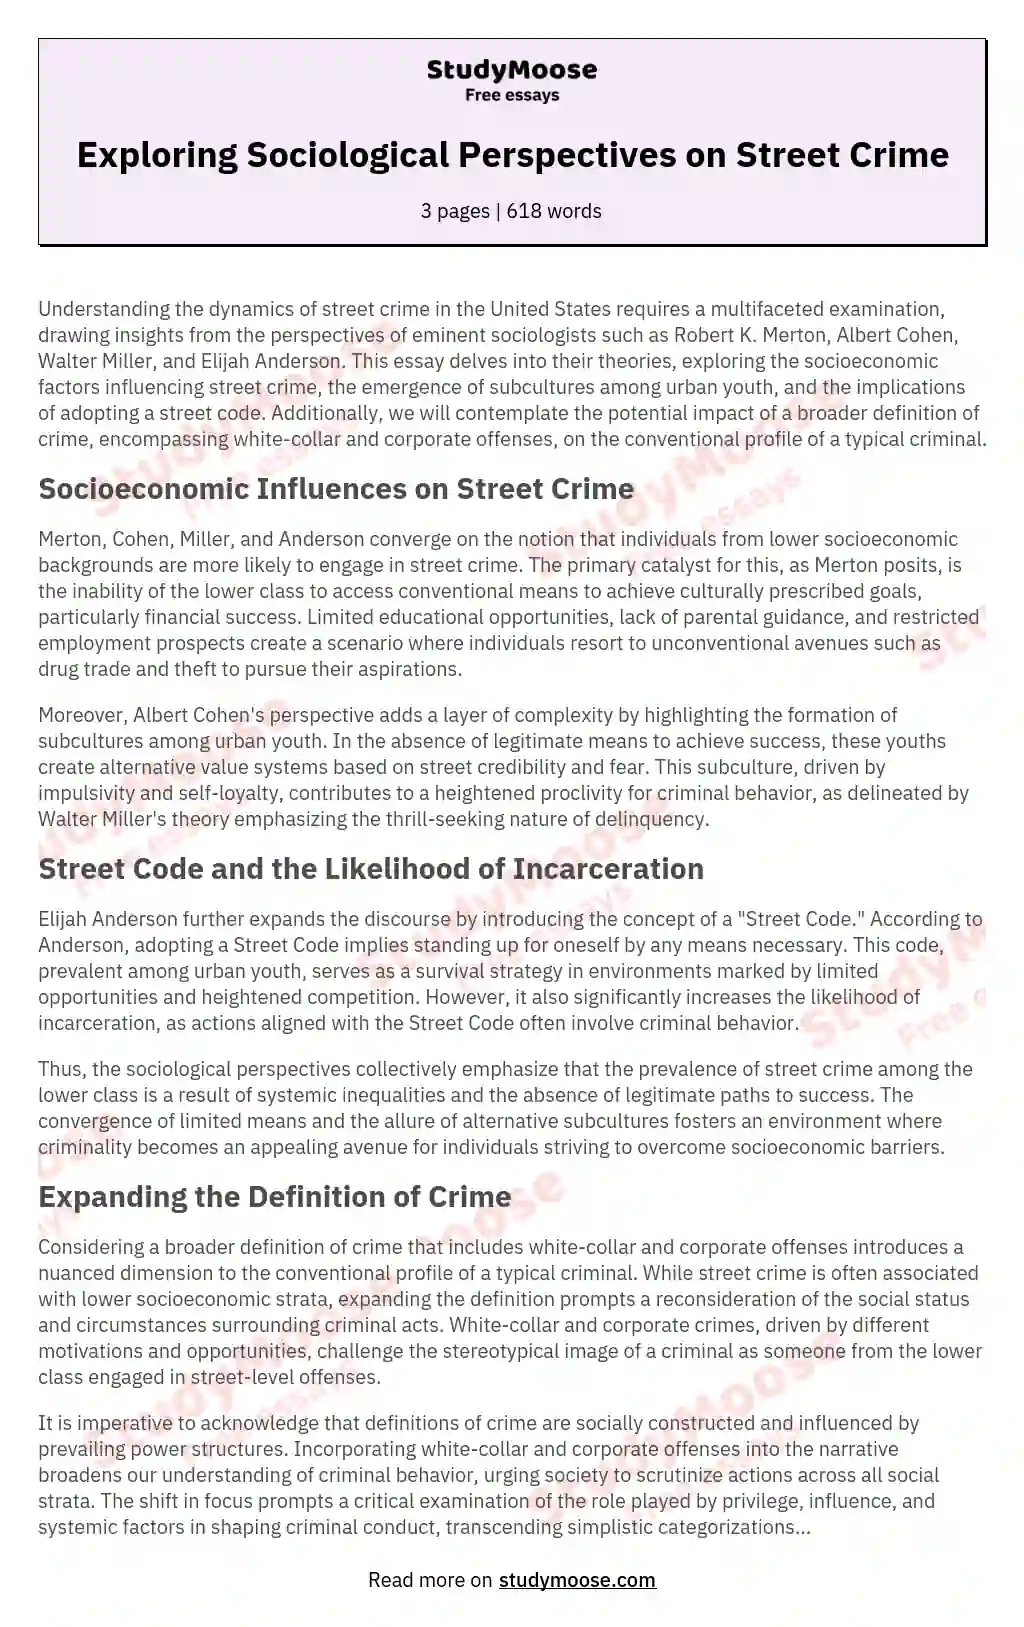 Exploring Sociological Perspectives on Street Crime essay